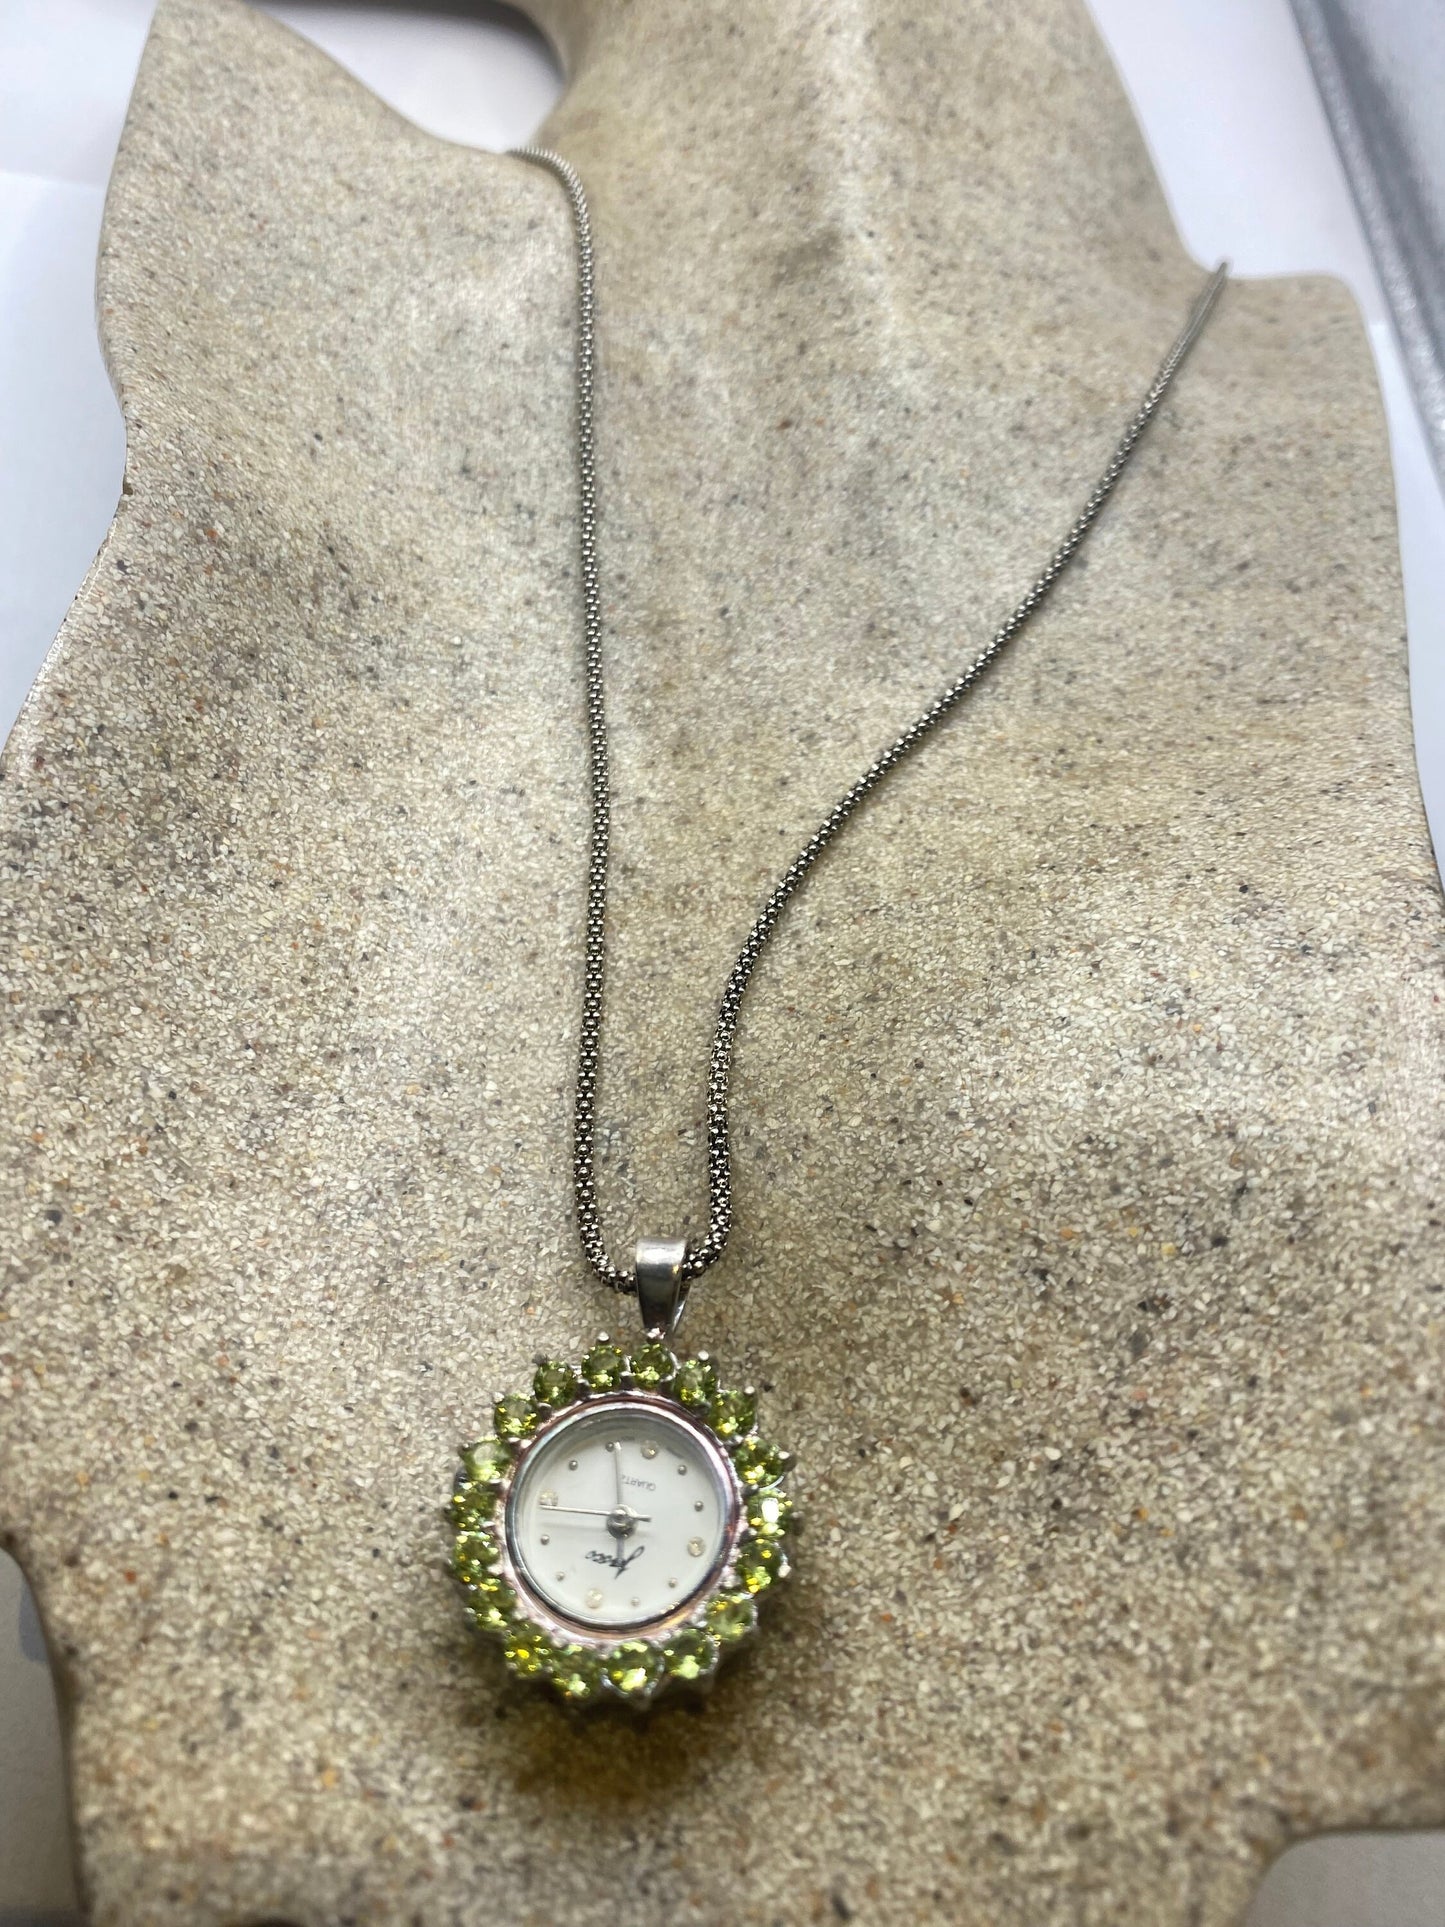 Vintage Watch Necklace 925 Sterling Silver Green Peridot Antique Pendant